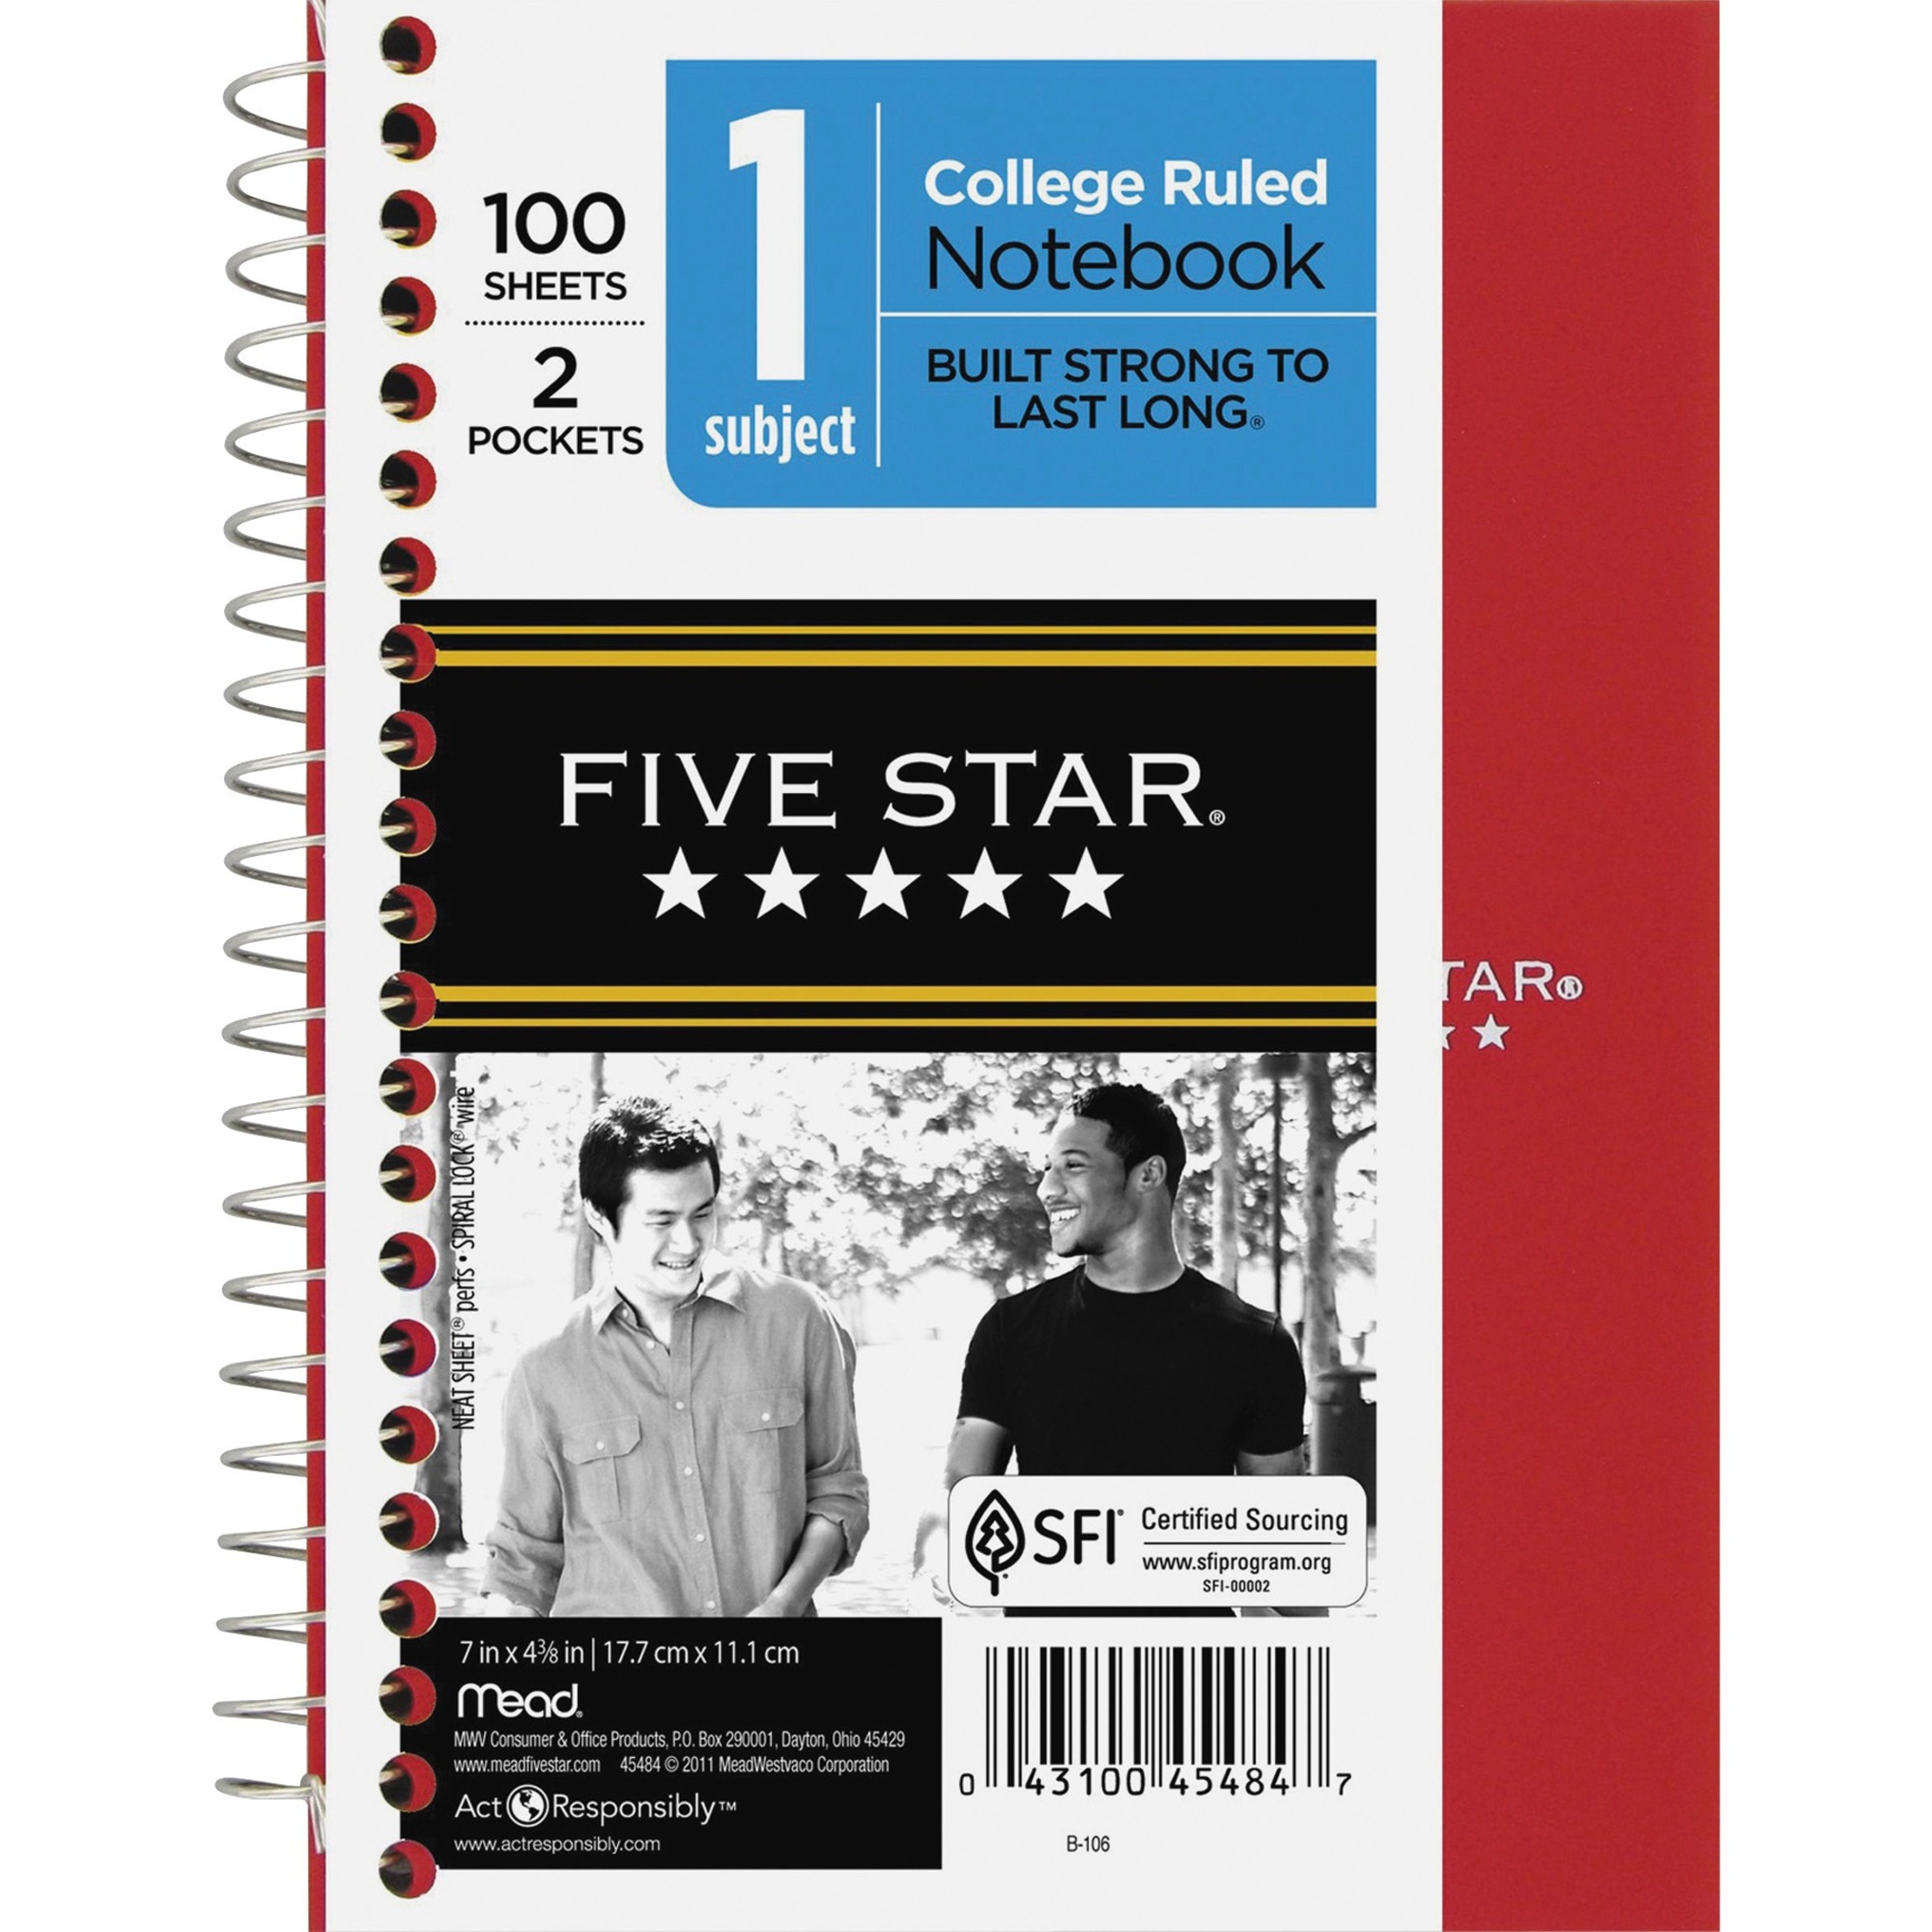 Five Star Personal Spiral Notebook, 100 Sheets, College Ruled, 7" x 5 1/2", Assorted (45484) - image 3 of 3